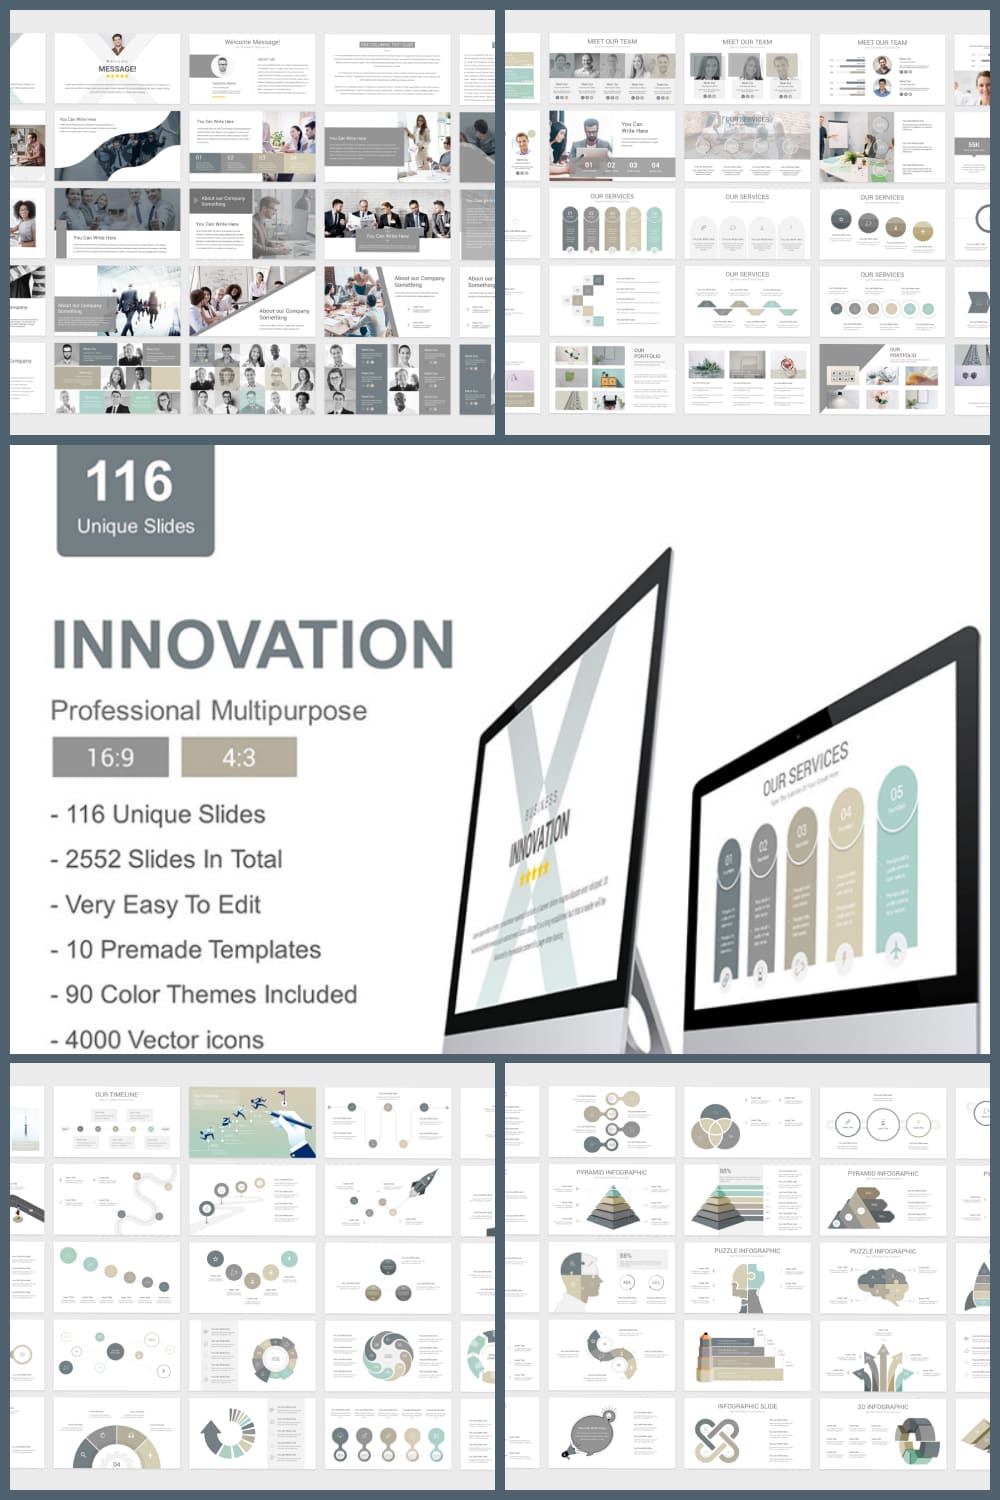 Innovation PowerPoint Presentation Collage image.